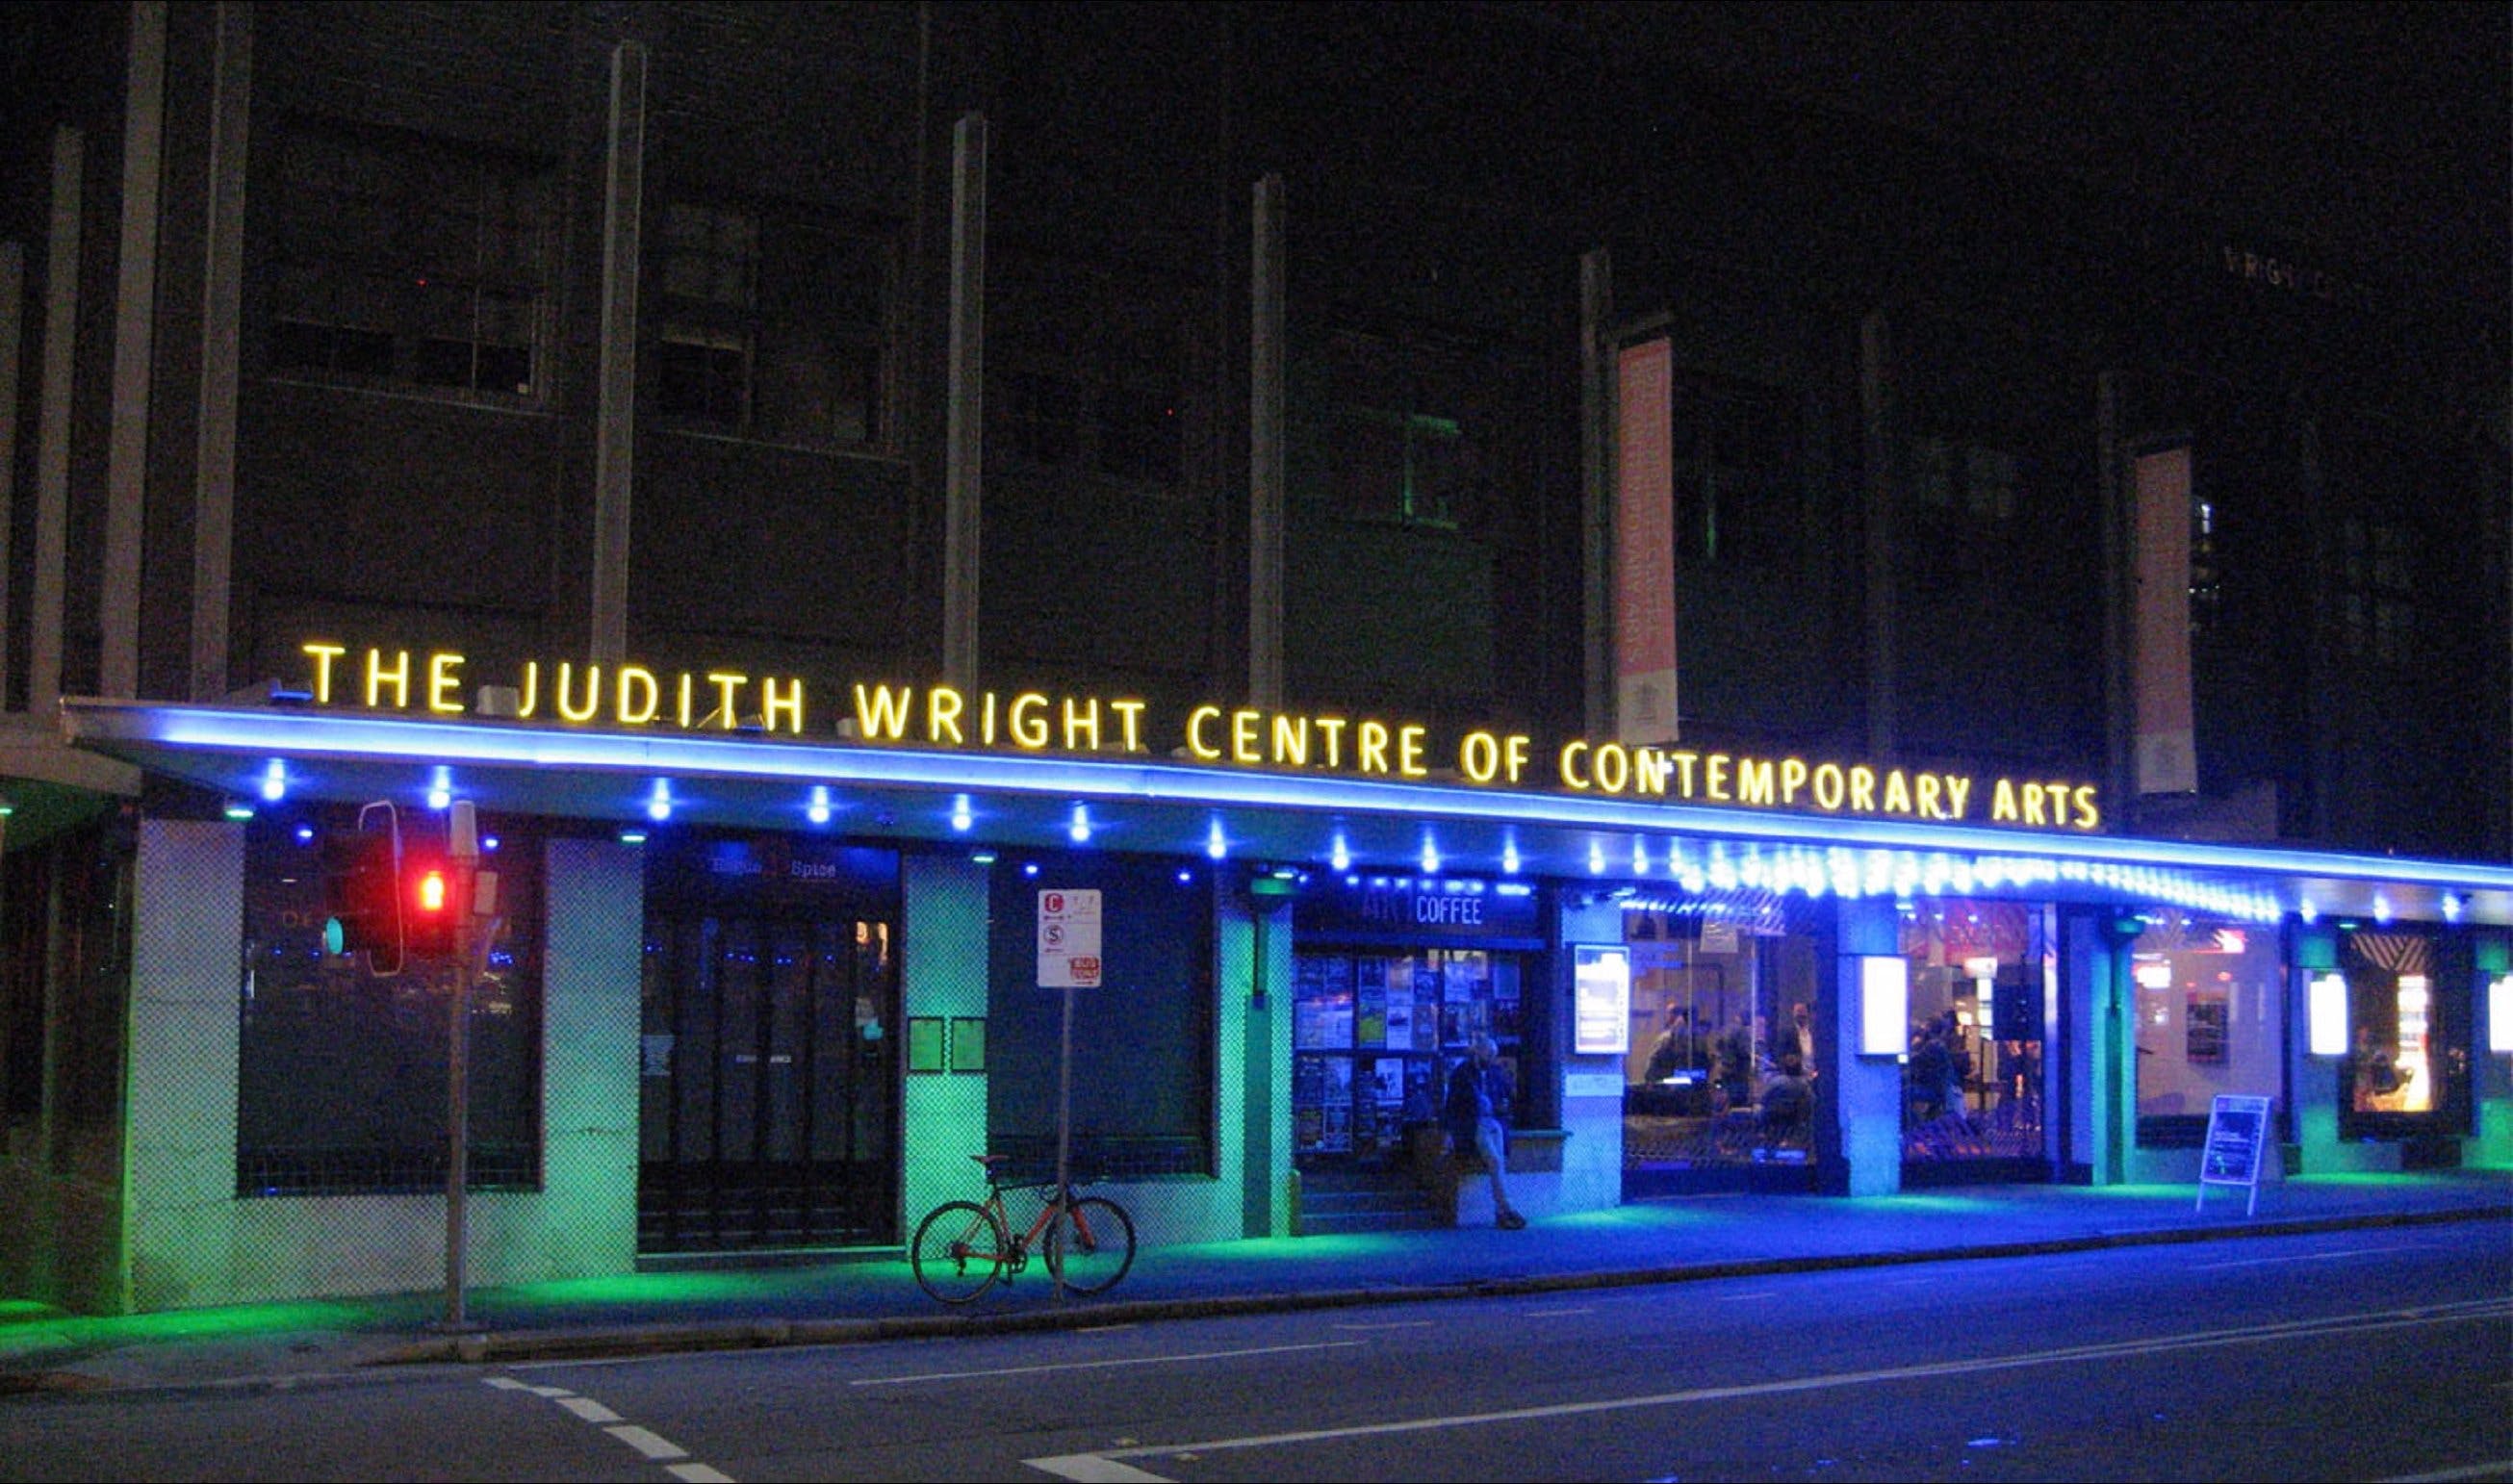 The Judith Wright Centre of Contemporary Arts Logo and Images